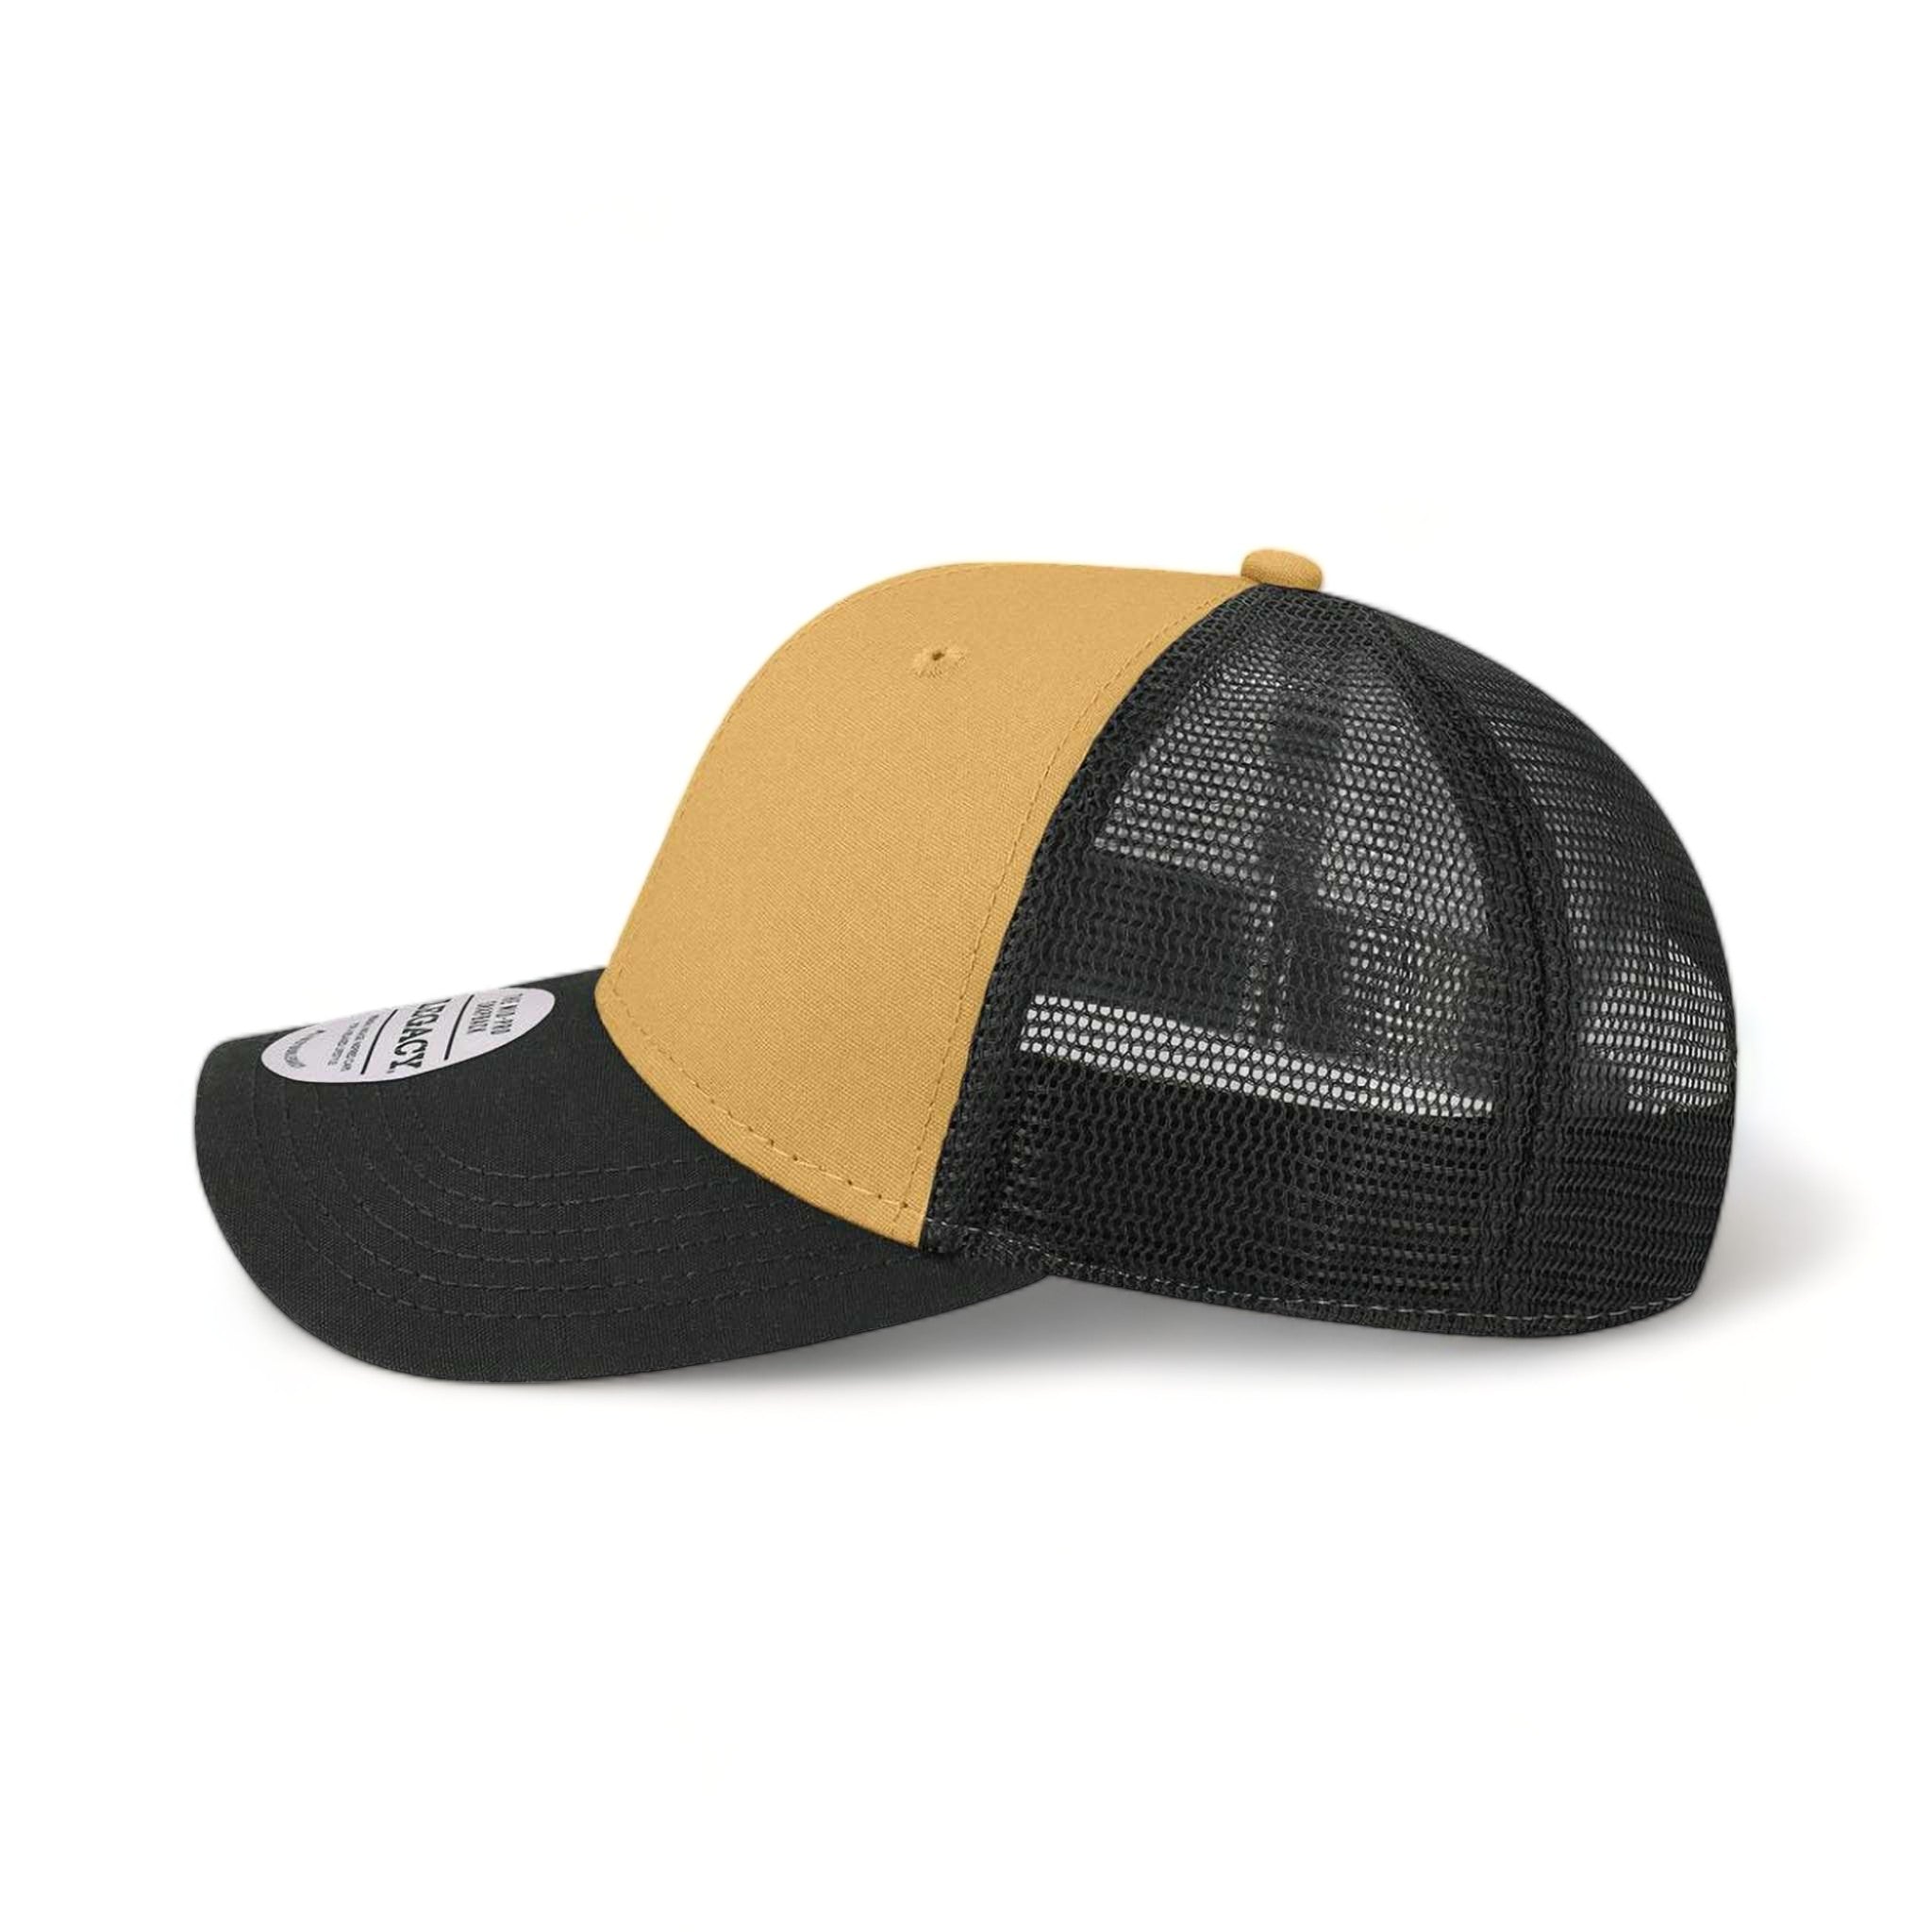 Side view of LEGACY MPS custom hat in wheatfield and black